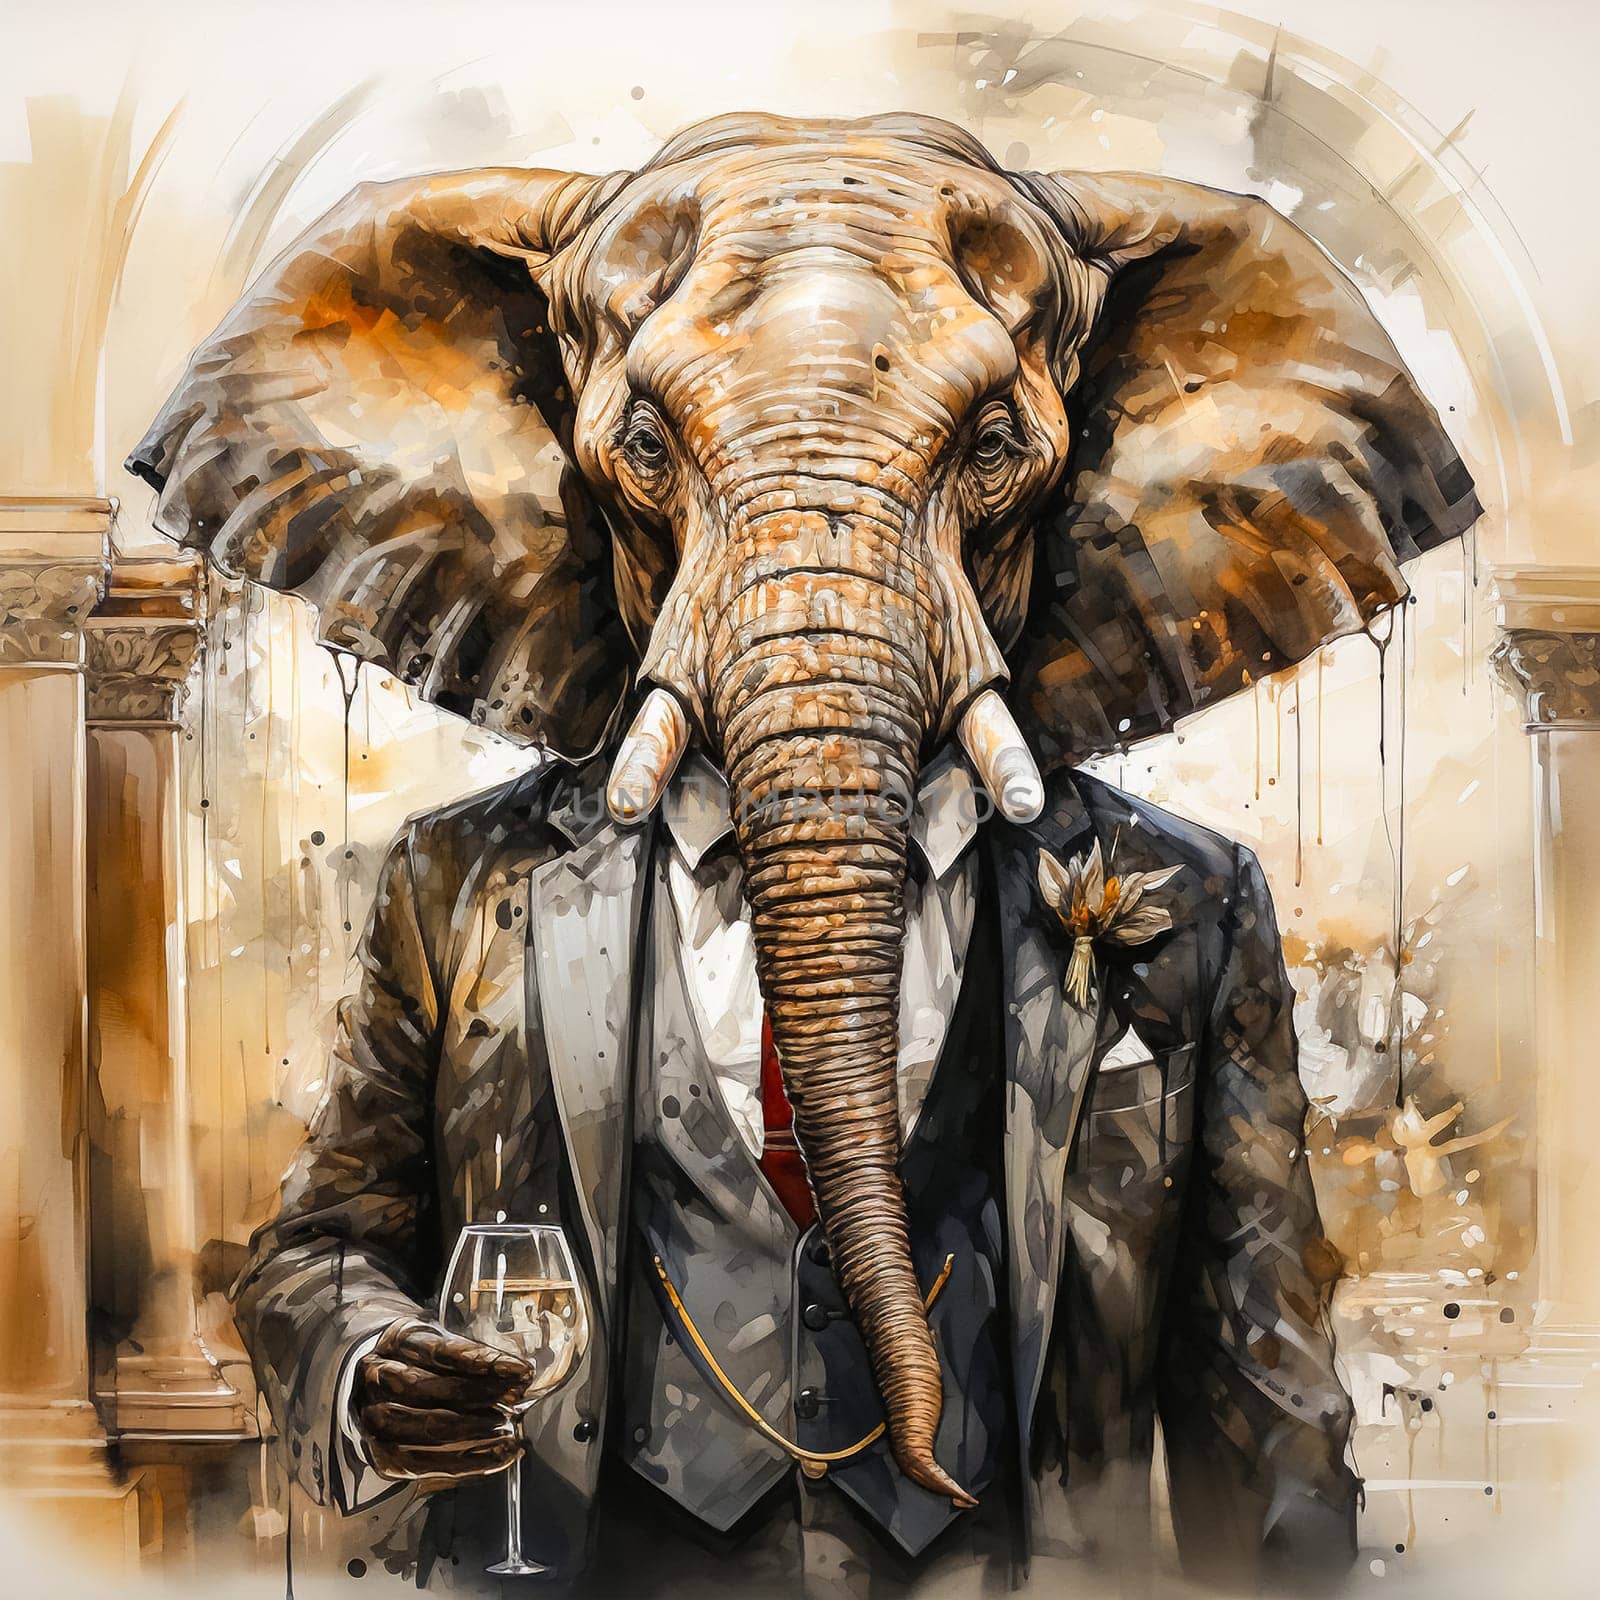 watercolor illustration of an elephant in a business suit, a unique and captivating image